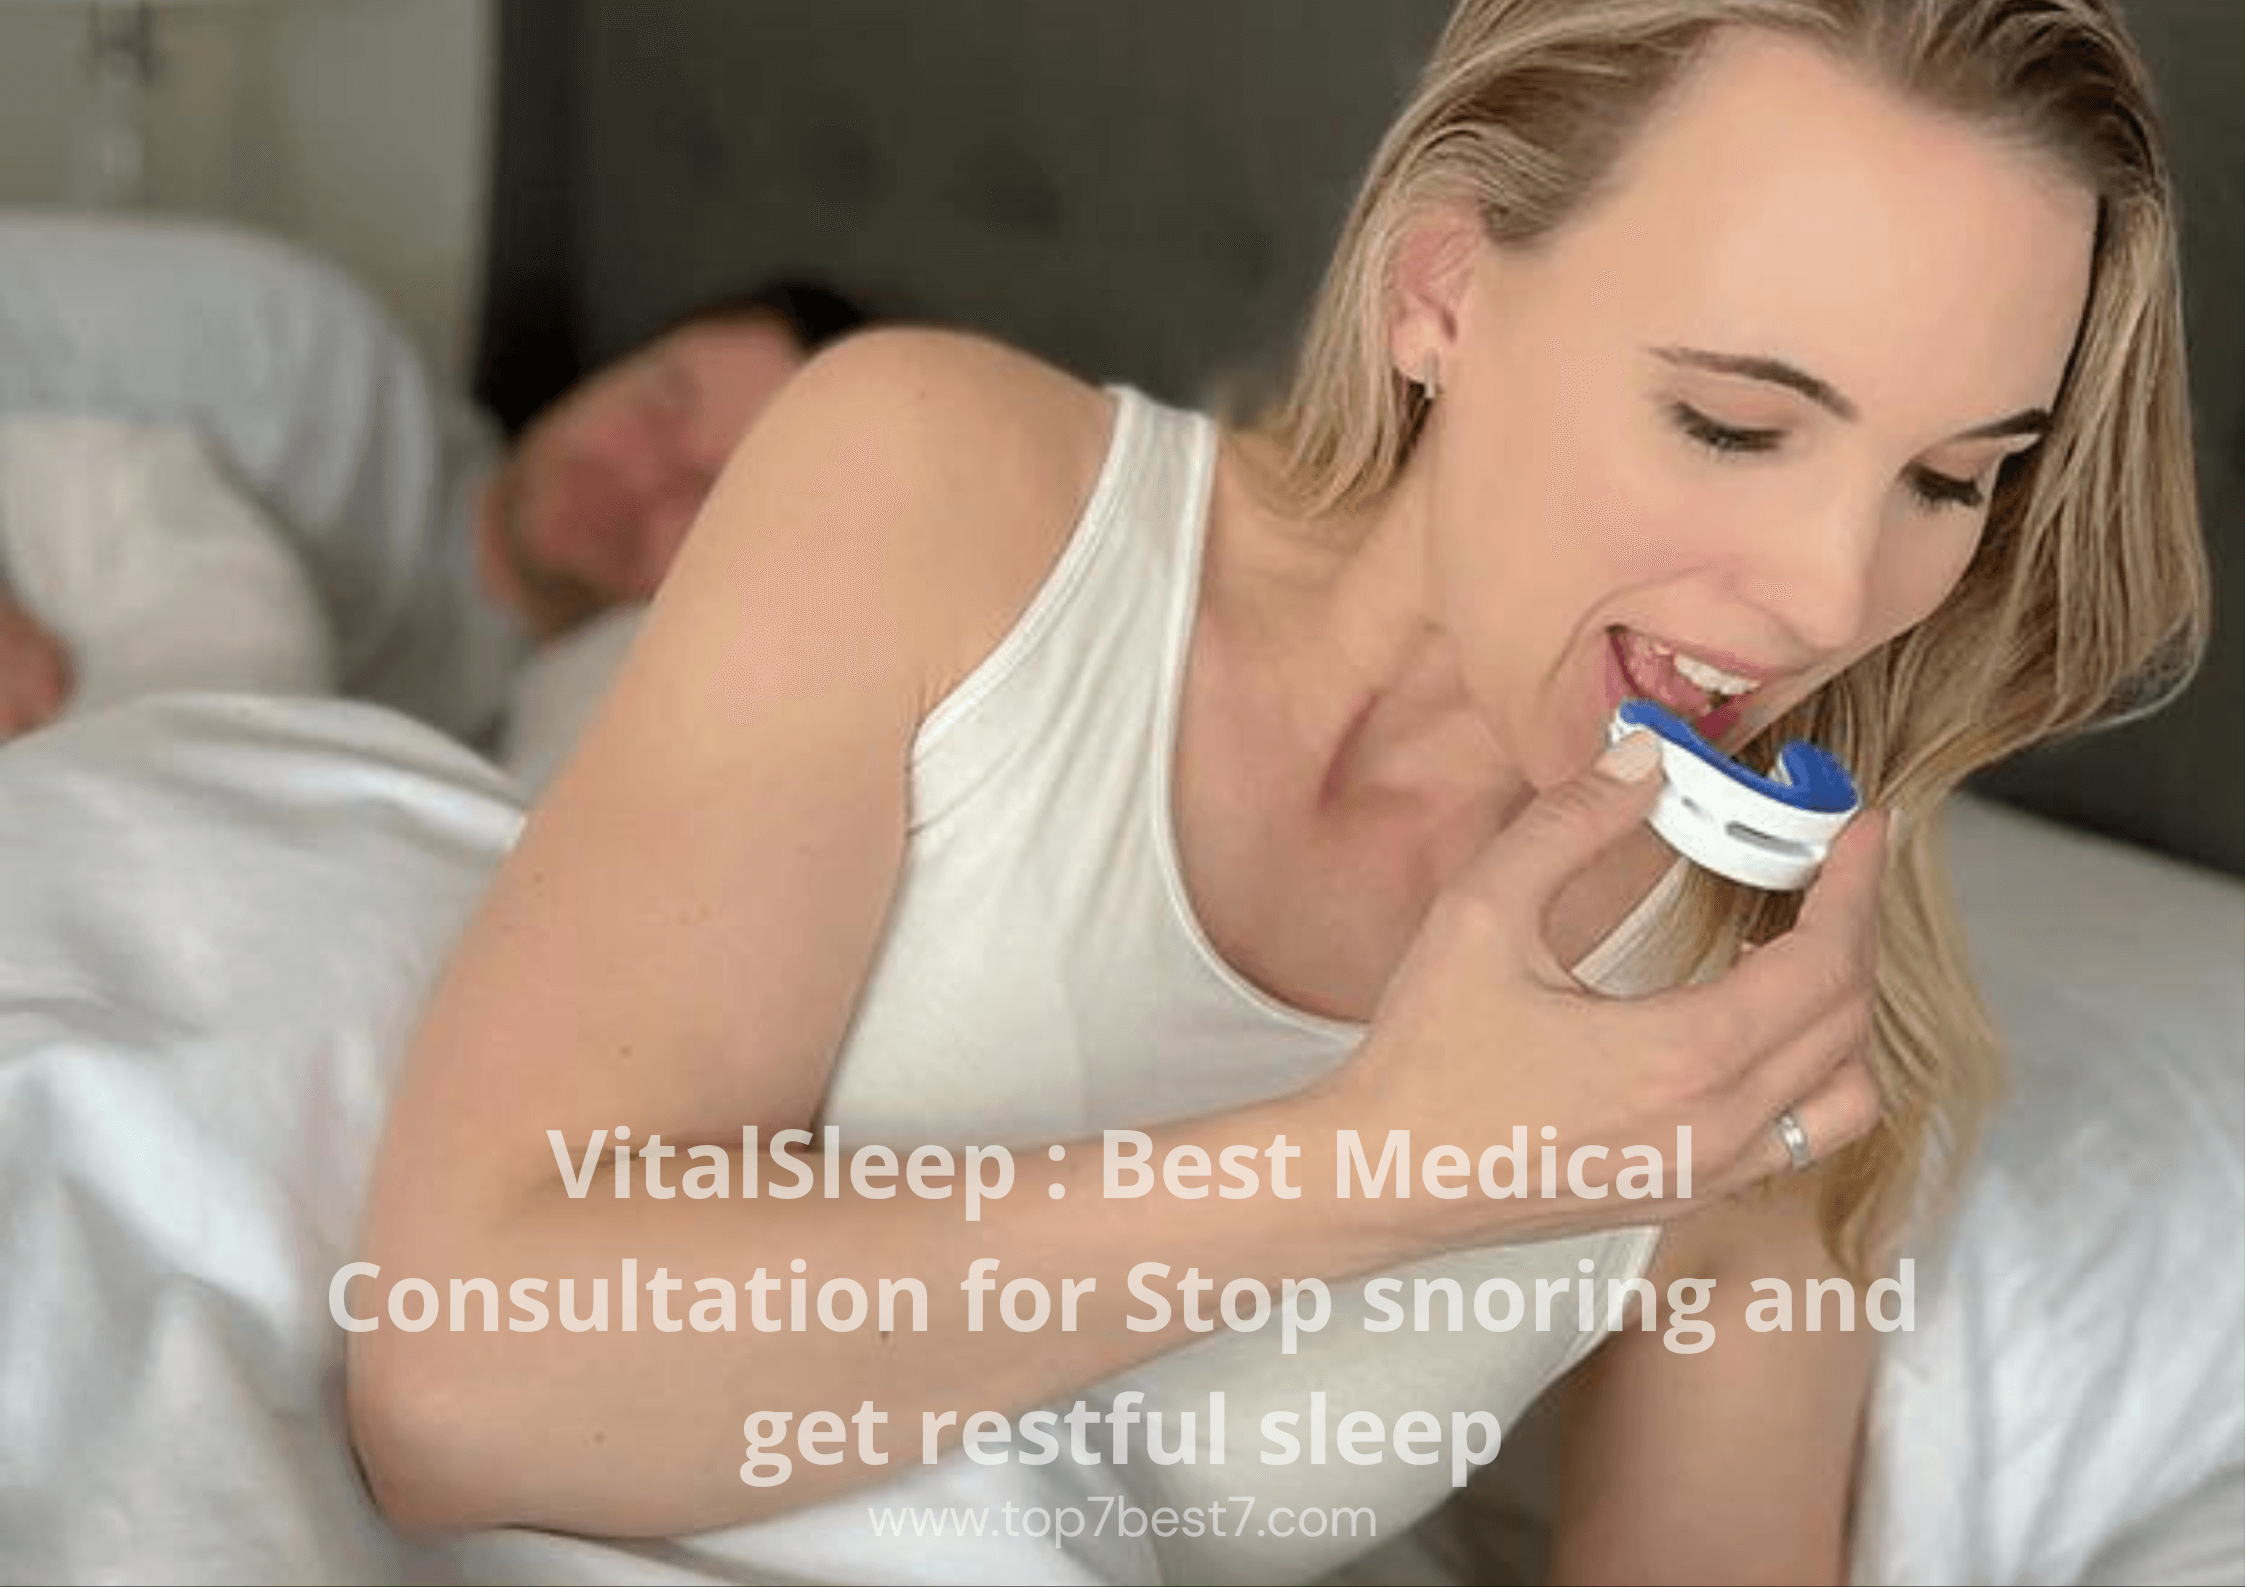 You are currently viewing VitalSleep : Best Medical Consultation for Stop snoring and get restful sleep